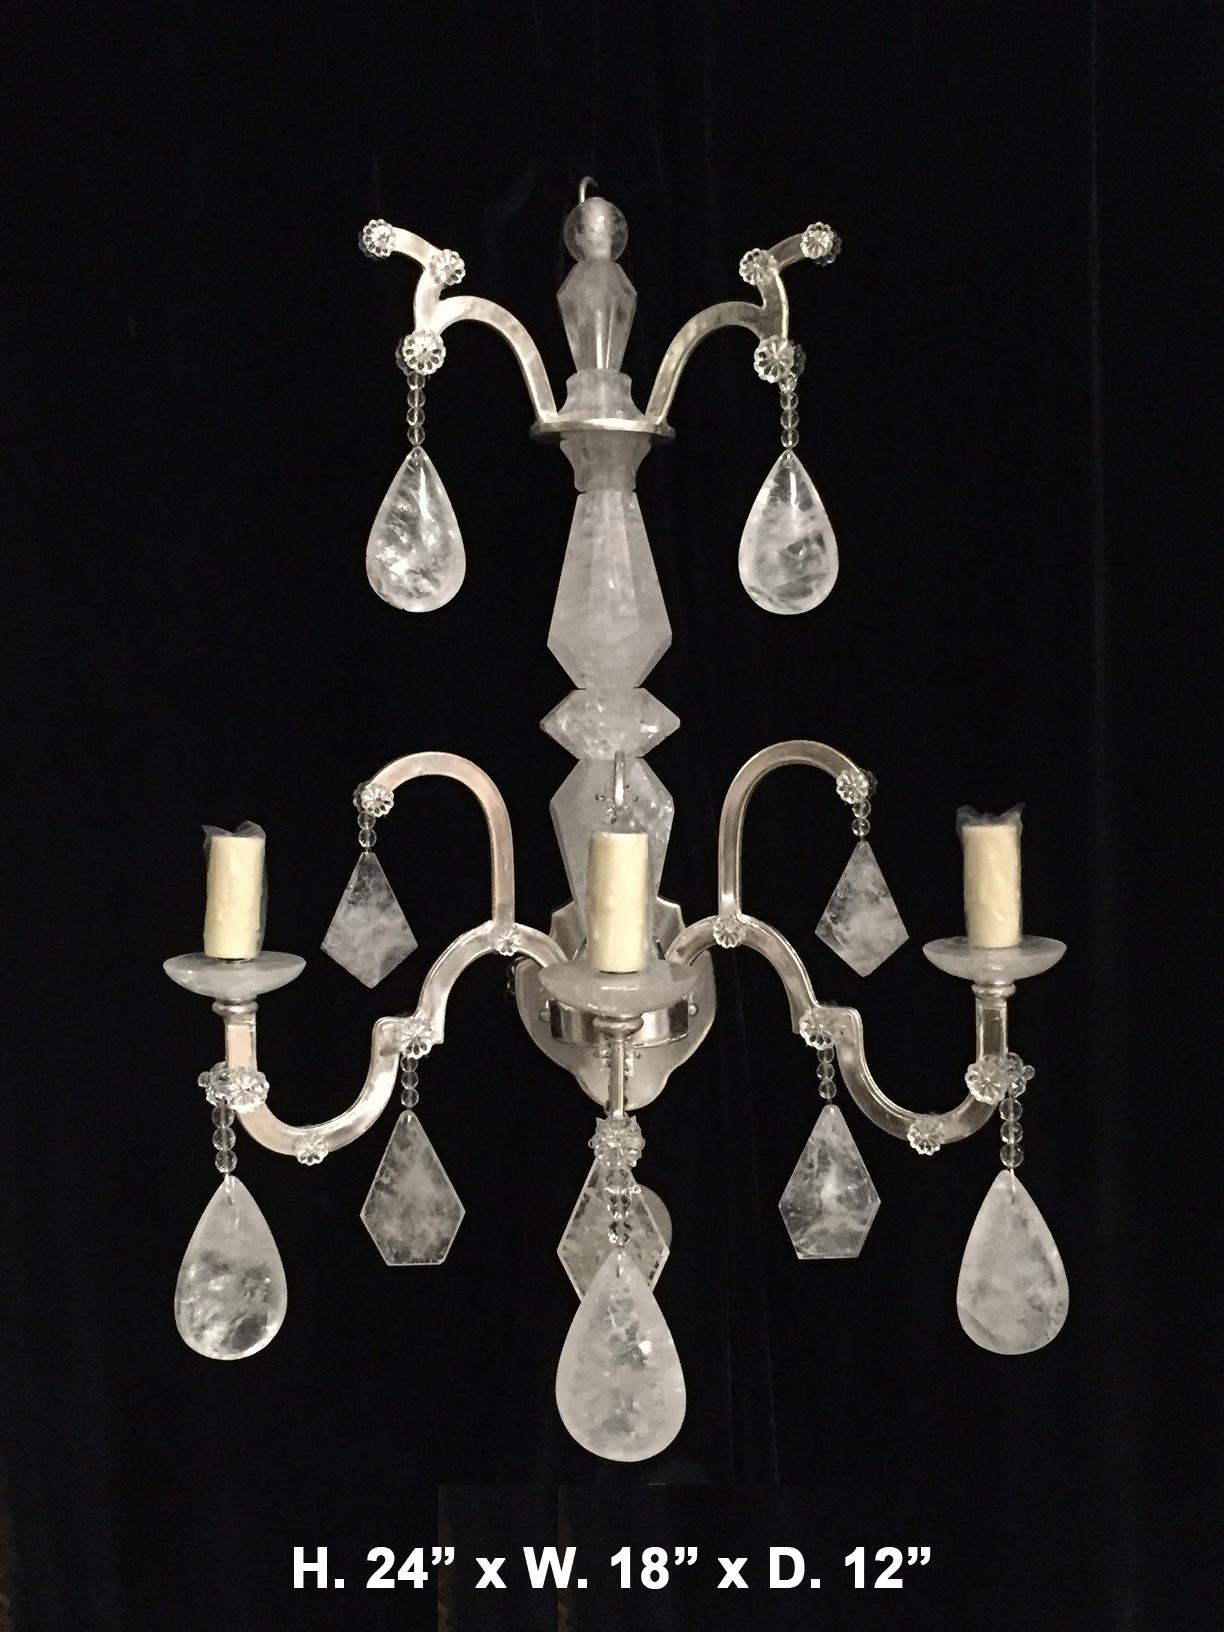 Striking pair of neoclassical style hand-carved and polished rock crystal silver-leafed three-light sconces.
21st century.
Each silver-leafed sconce is centered with a hand-carved and faceted rock crystal central shaft, issuing three scrolling